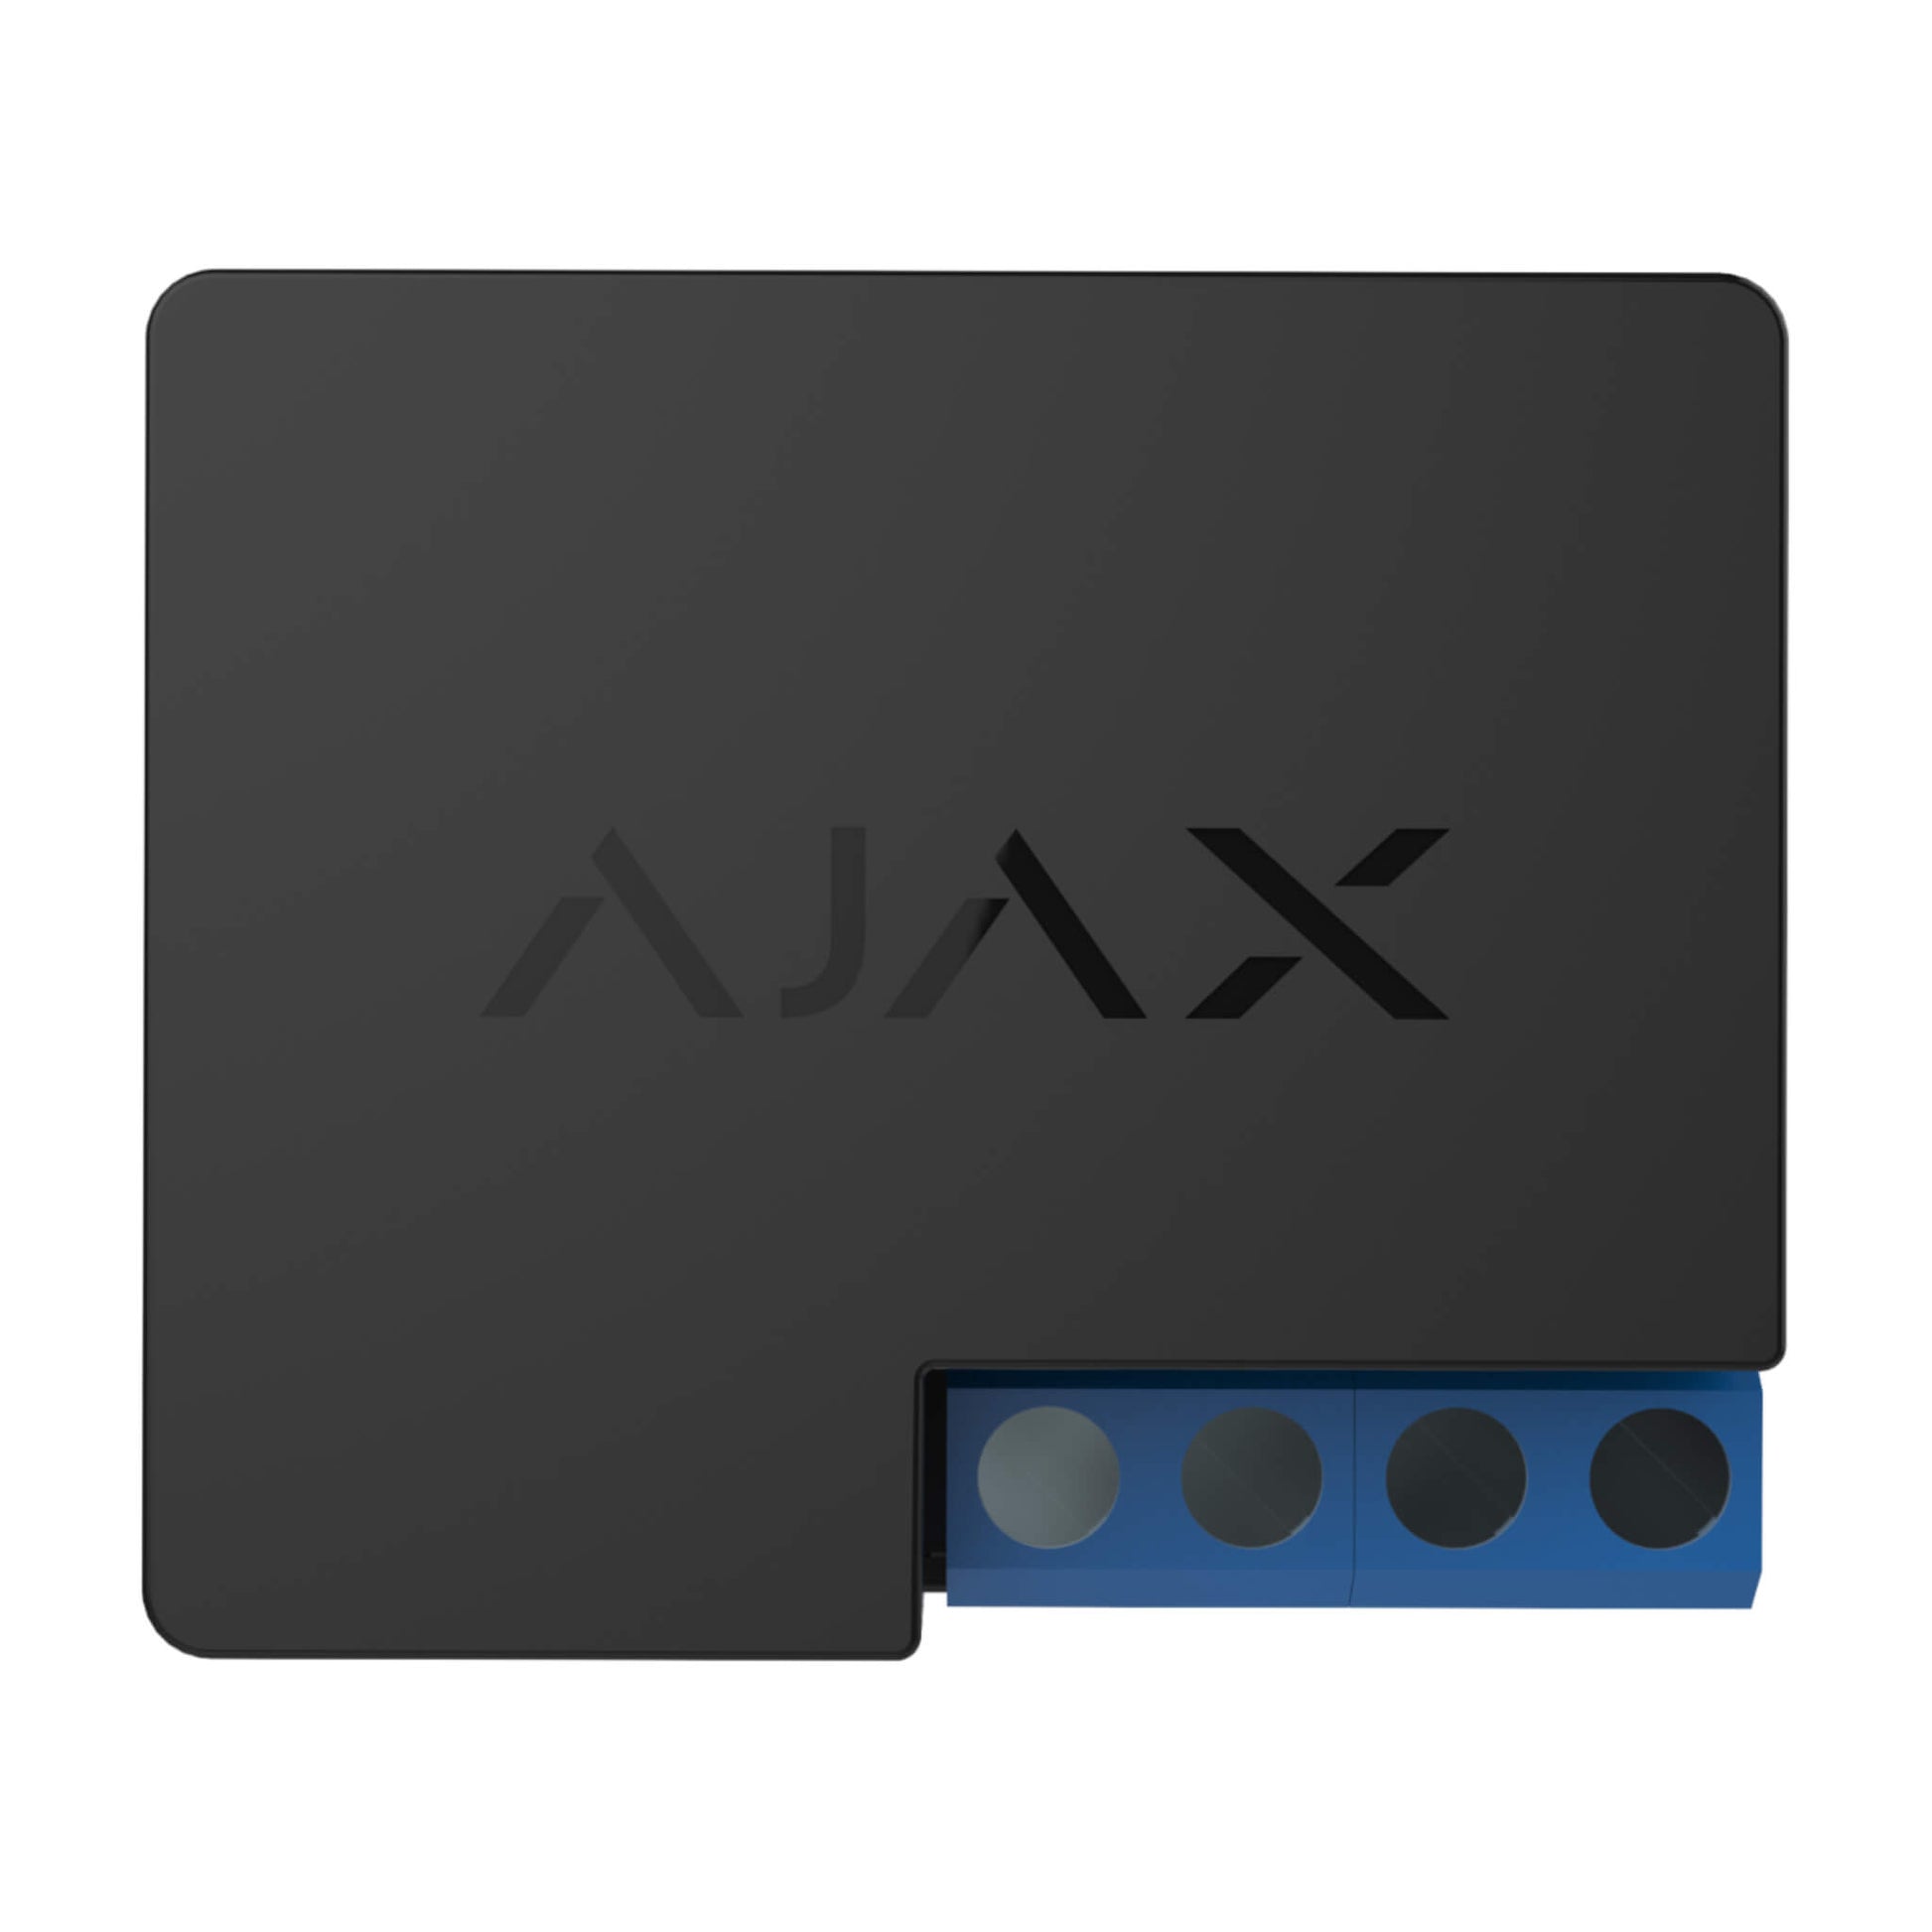 Ajax Security Systems - Ajax Relay a wireless smart device that can control low voltage power devices, for smart home automation and business security , Device is Black ,39 × 33 × 18 mm in size , 25 grams in weight, for indoor installation, IP20